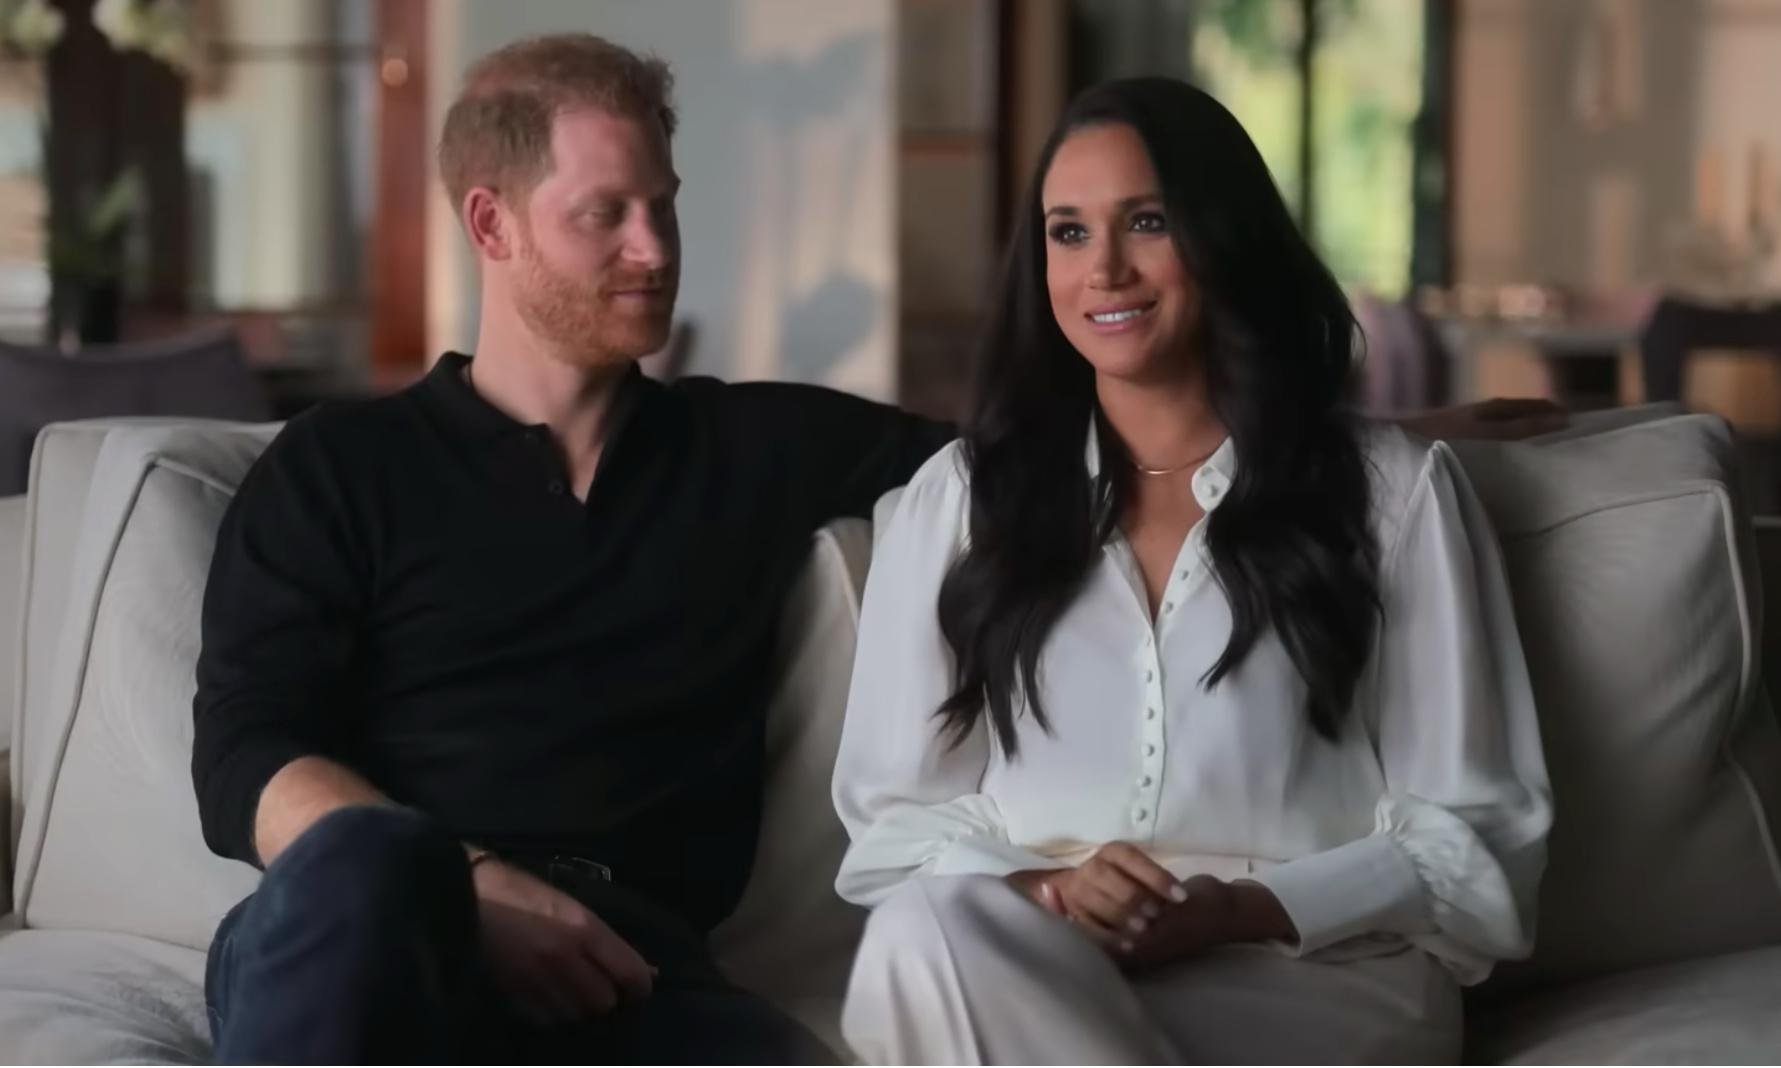 Prince Harry: royals didn’t understand risk to Meghan of racial attacks